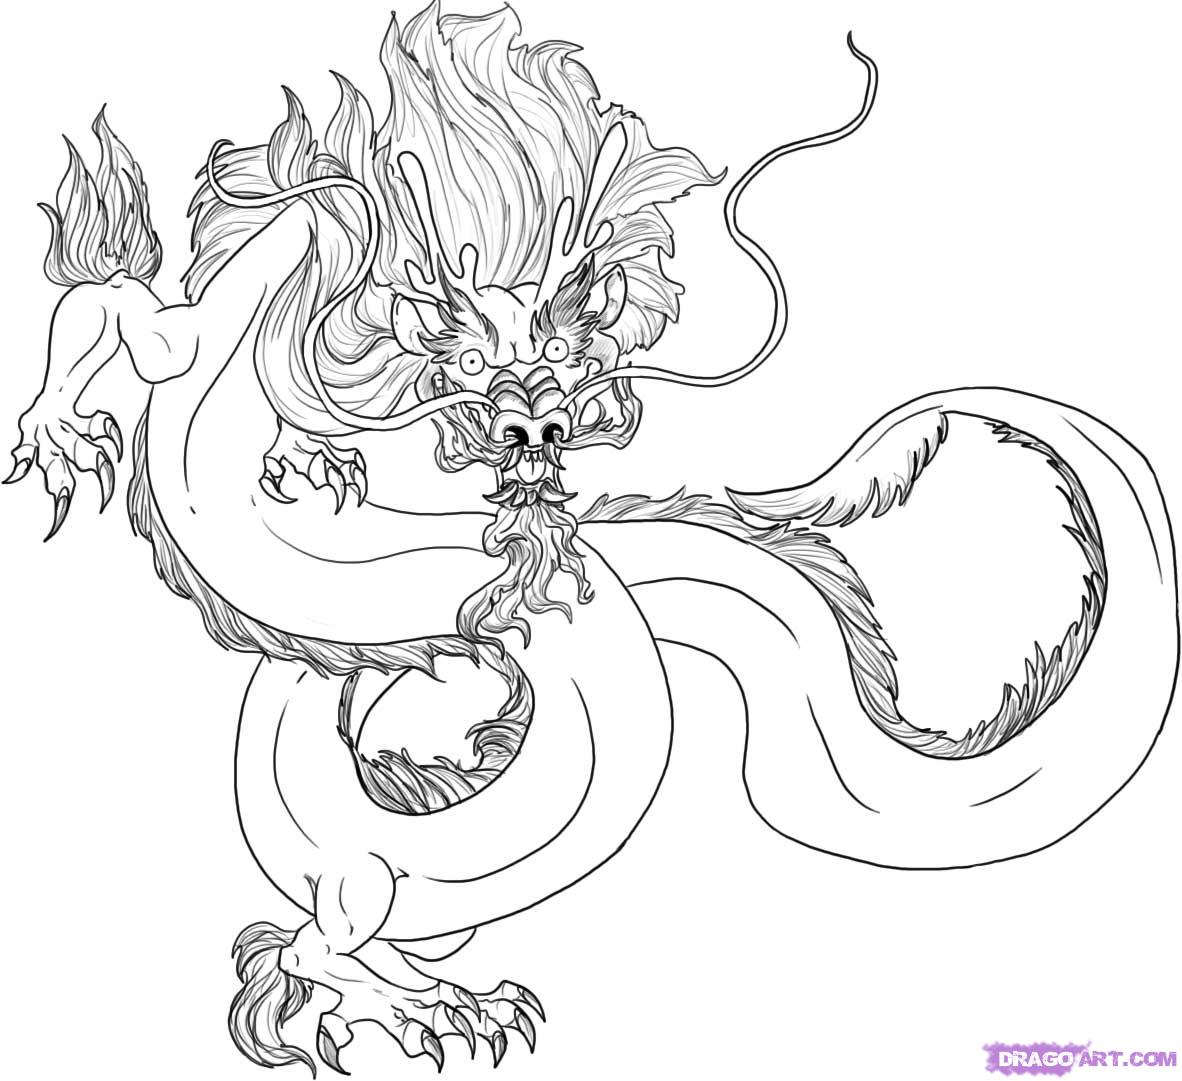 How to Draw a Traditional Chinese Dragon, Step by Step, Dragons 